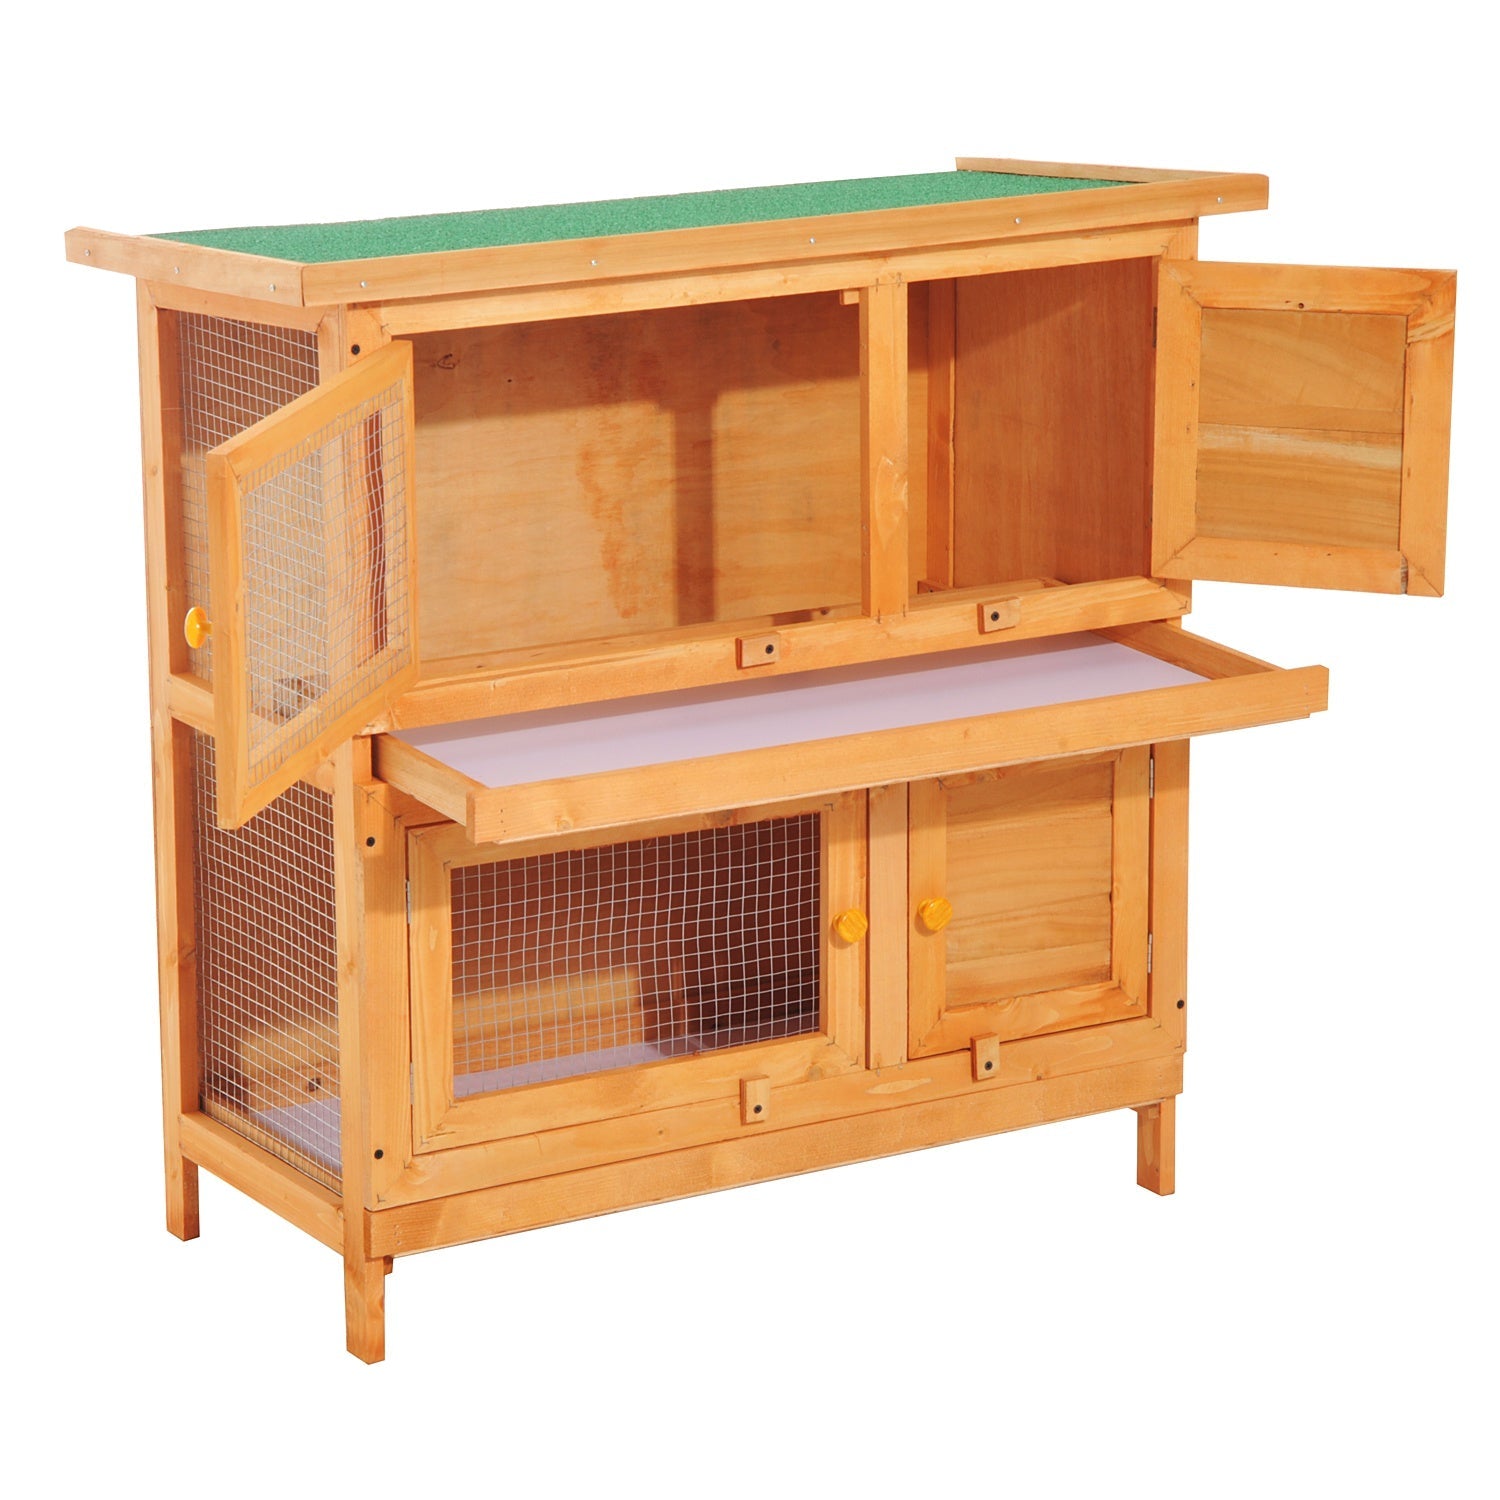 90cm 2 Tiers Rabbit Hutch Wooden Pet Cage W/ Run Bunny House-1